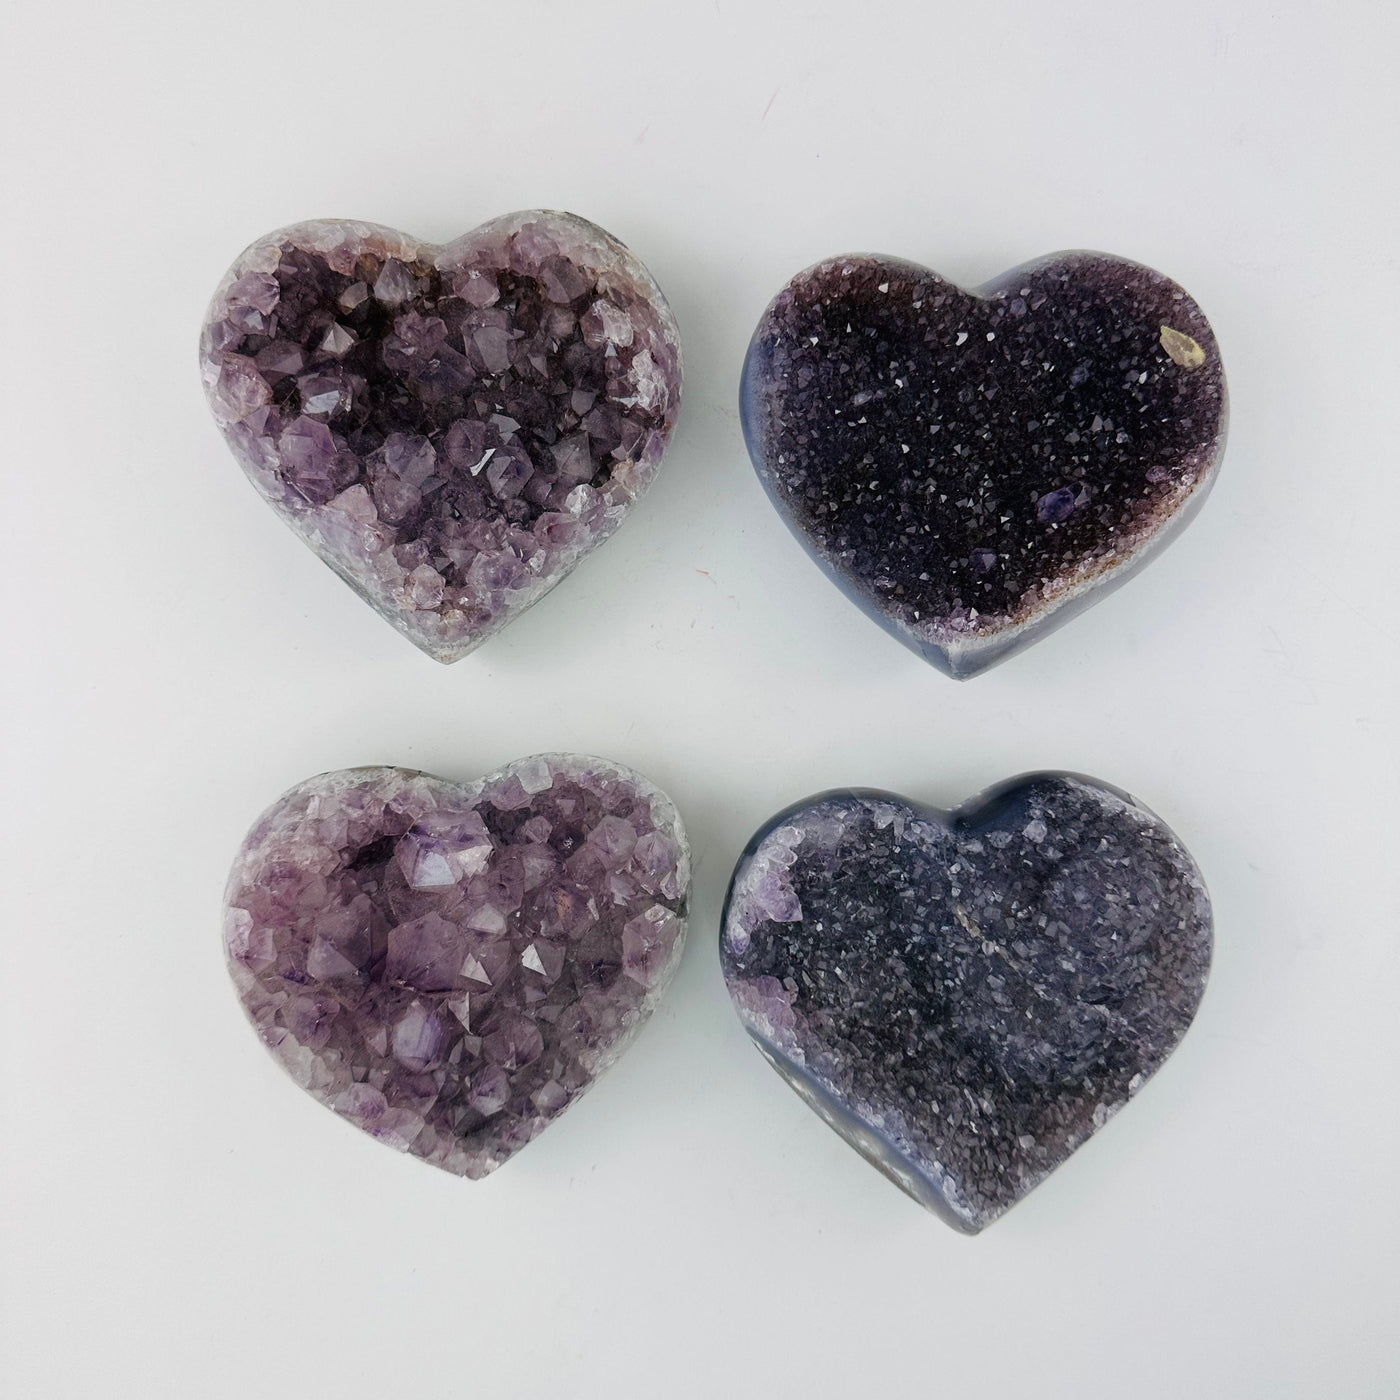 4 Amethyst Crystal Hearts lined up